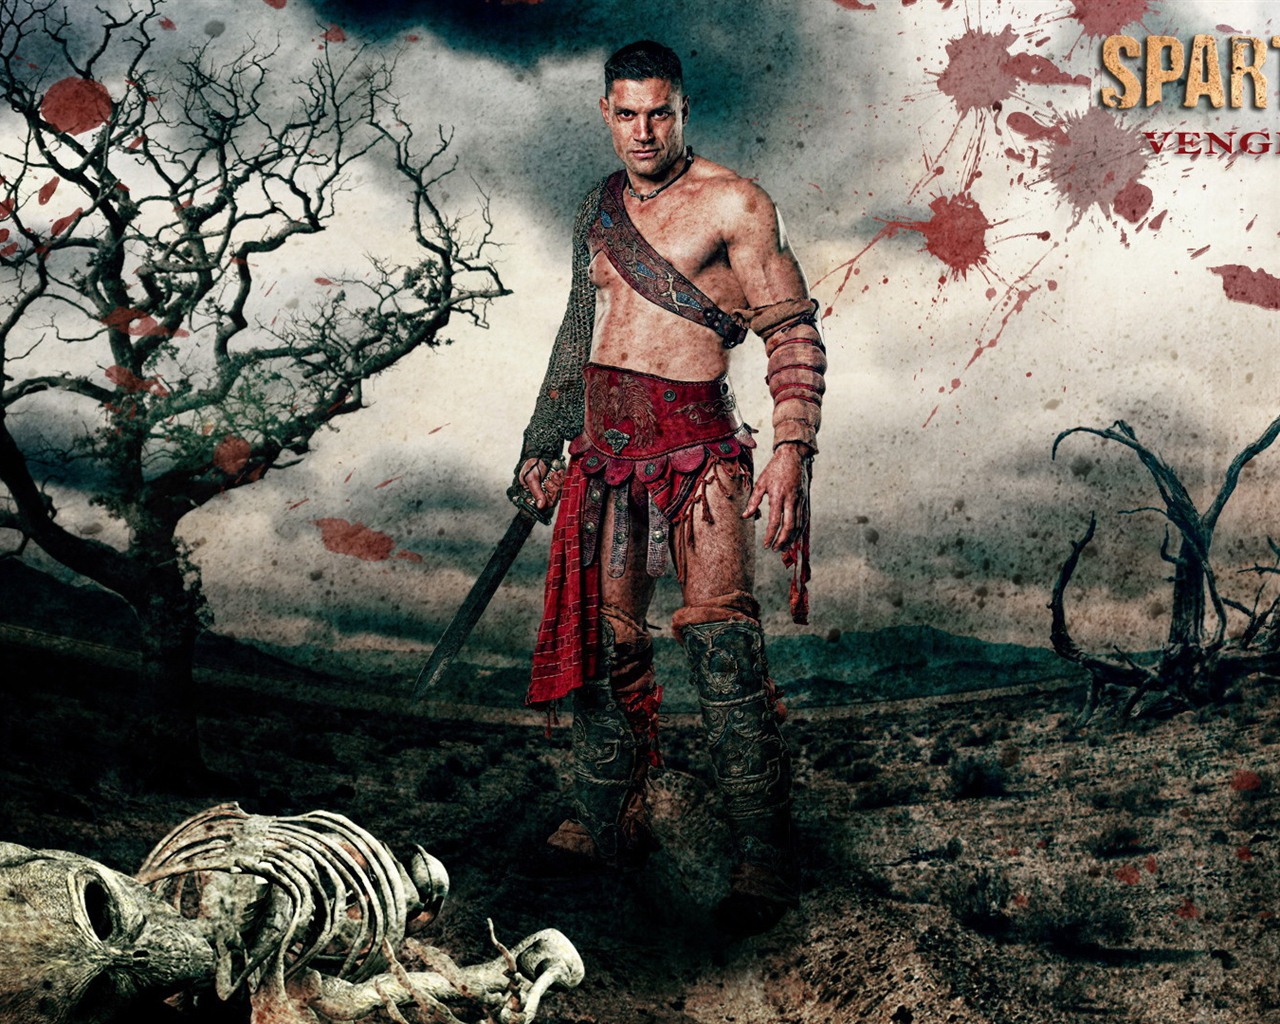 Spartacus: Blood and Sand HD Wallpaper #9 - 1280x1024